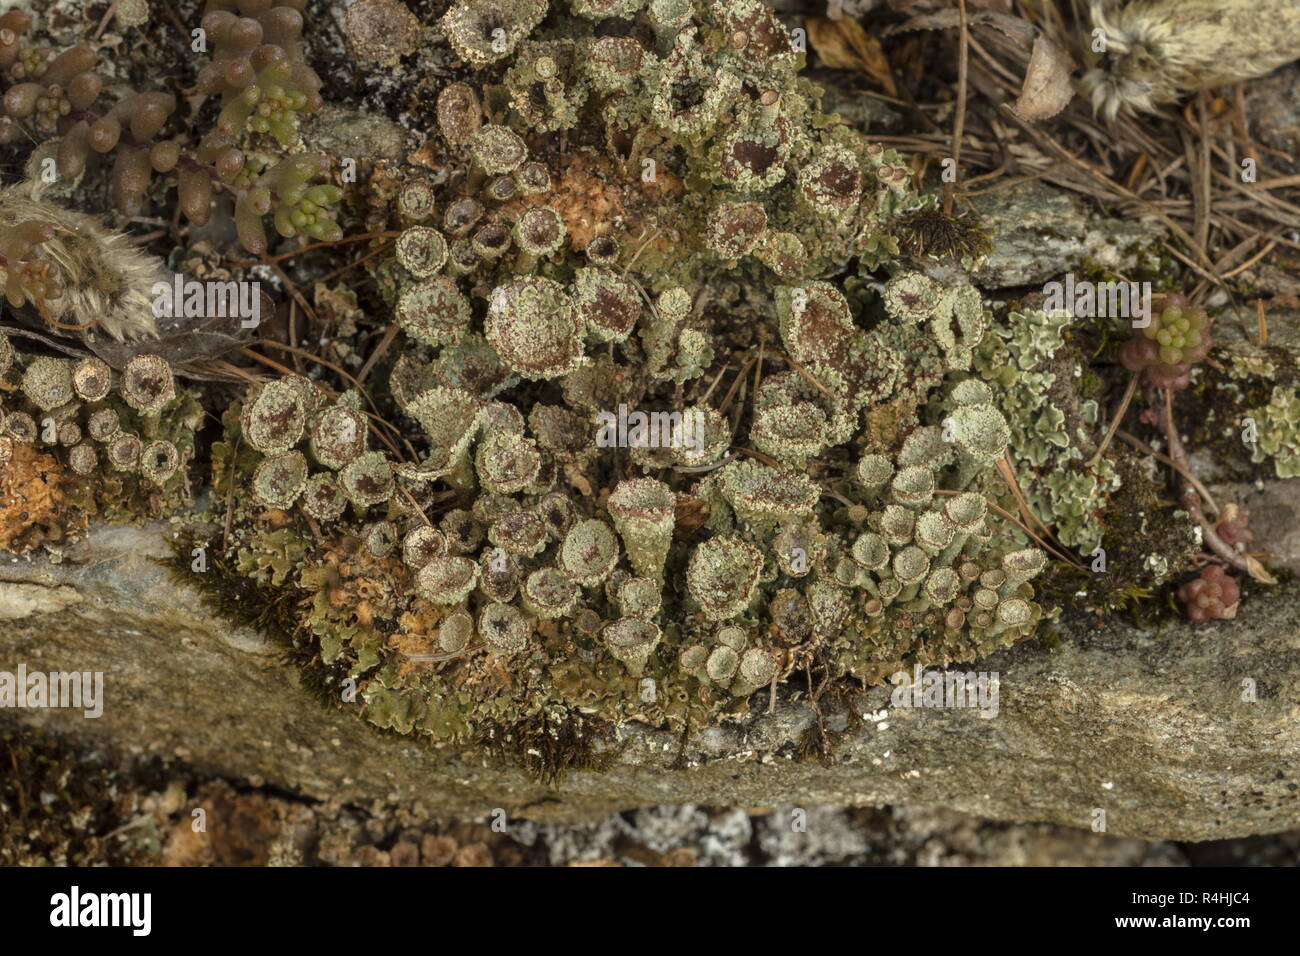 Mealy Pixie Cup, Cladonia chlorophaea with fruiting cups. On old wall. Stock Photo